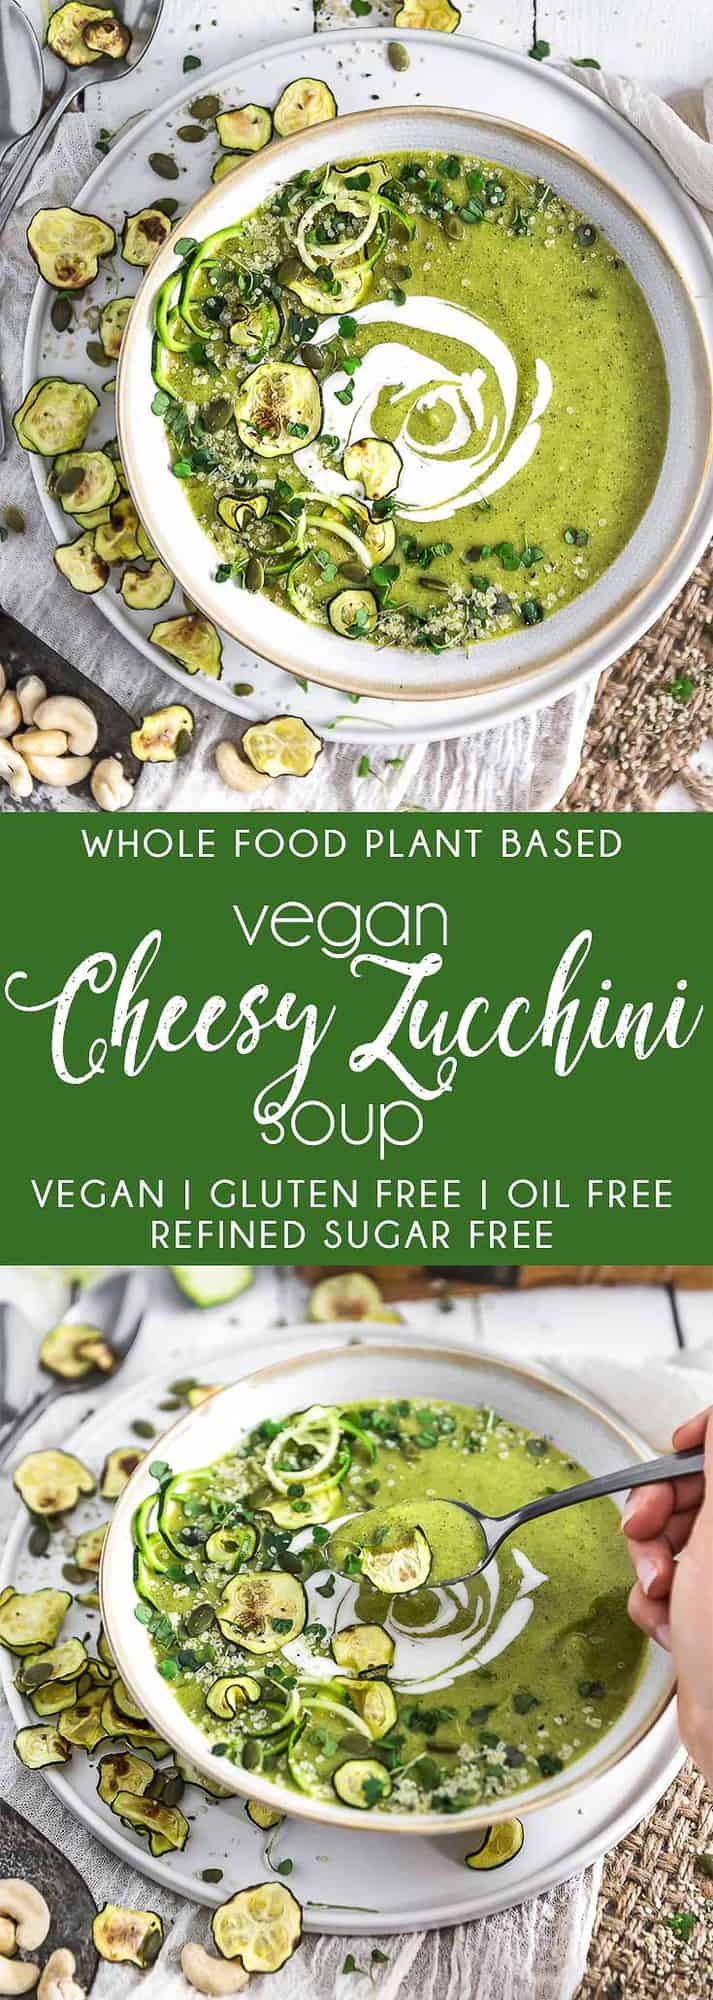 Vegan Cheesy Zucchini Soup, vegan soup, zucchini, plant based soup, plant based, vegan, vegetarian, whole food plant based, gluten free, recipe, wfpb, healthy, healthy vegan, oil free, no refined sugar, no oil, refined sugar free, dairy free, dinner party, entertaining, dinner, lunch, zucchini soup, soup, fast recipe, easy recipe, quick recipe, 30 minute meal,